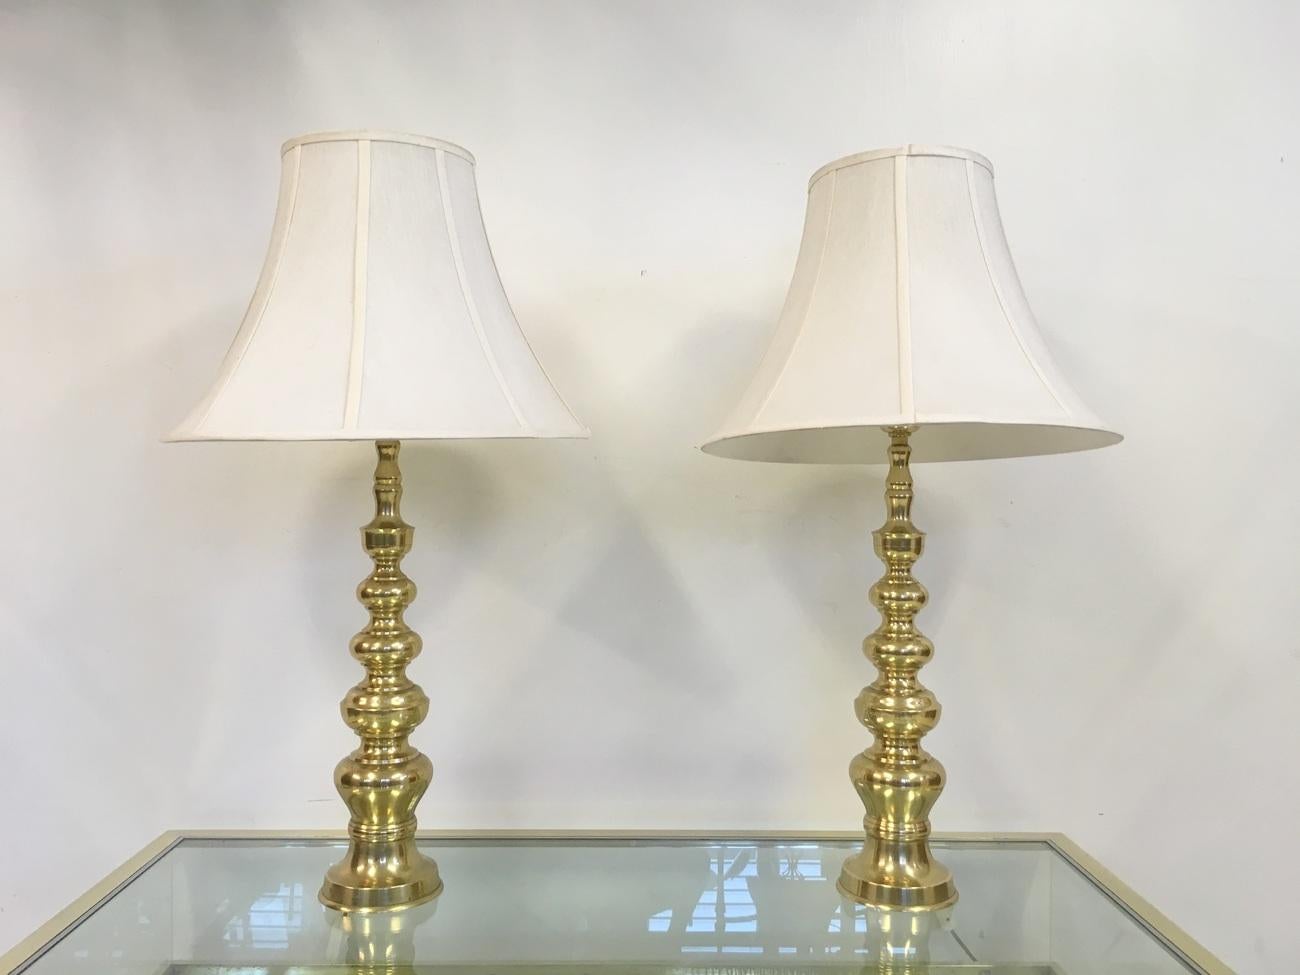 A pair of brass table lamps
Original shades
1970s
Height with shade is 90cm.